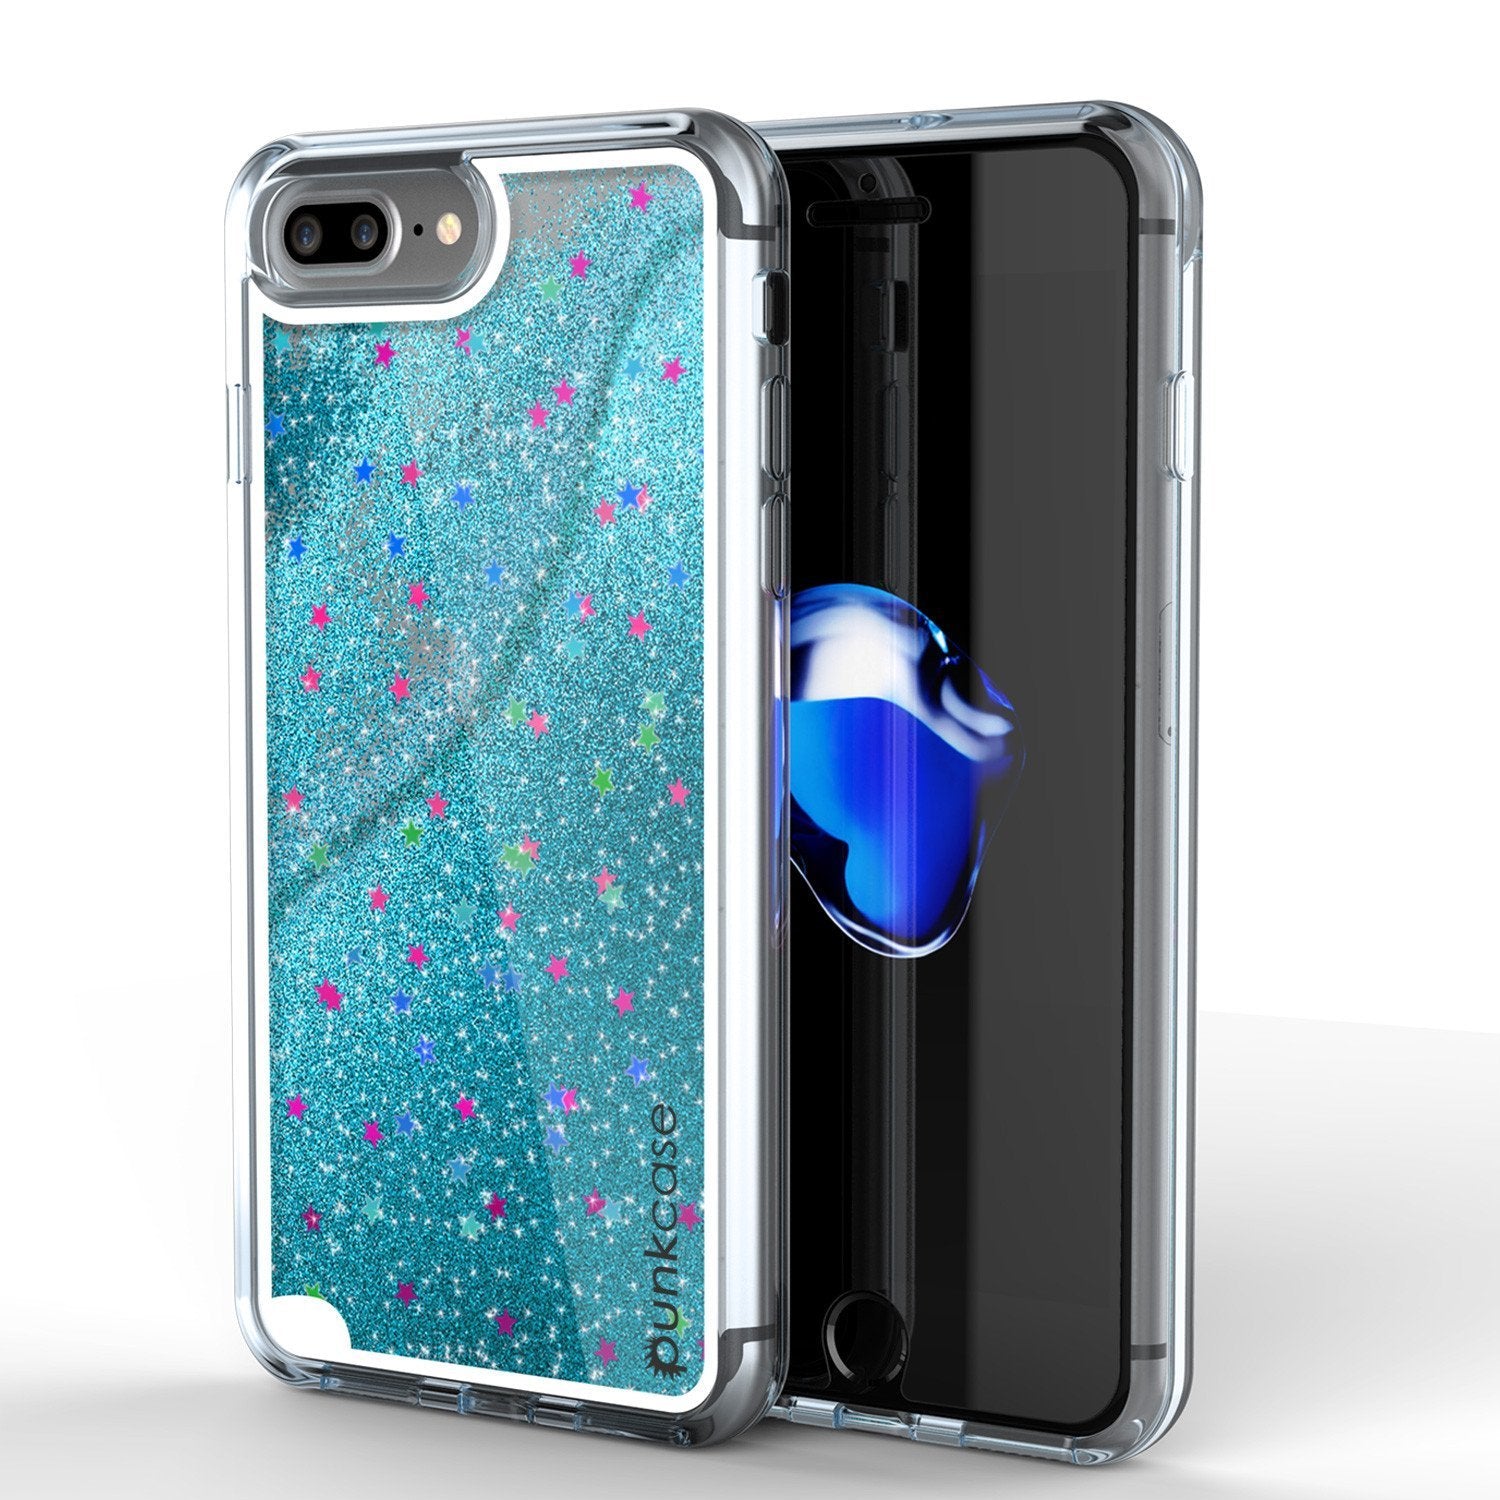 iPhone 8+ Plus Case, PunkCase Liquid Teal Floating Glitter Cover Series